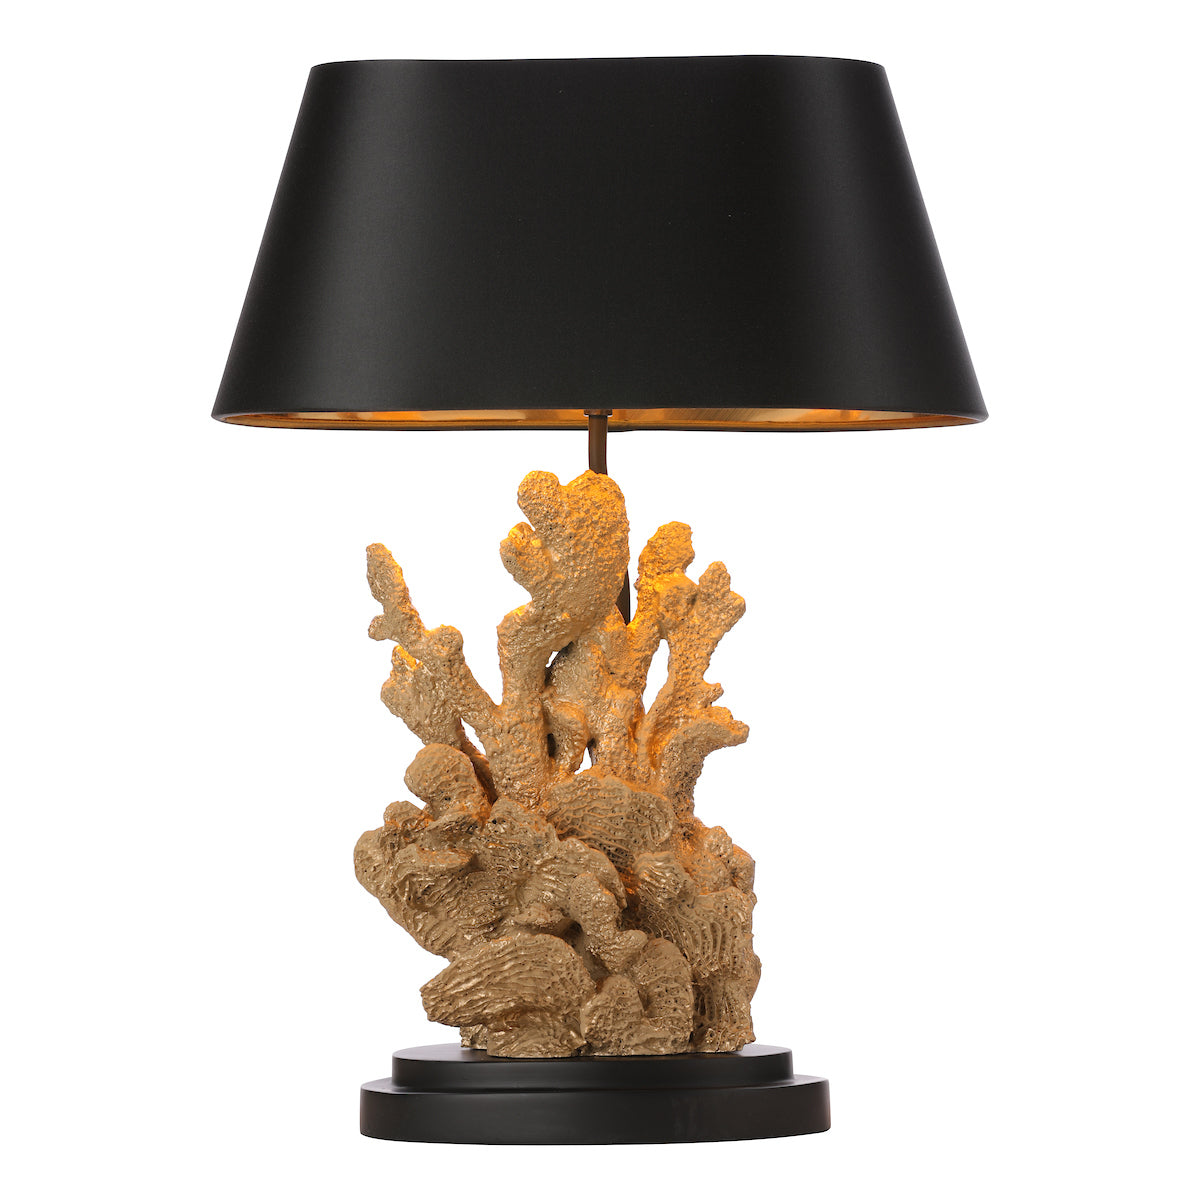 Korallion Gold and black Table lamp by David Hunt Lighting shown with the Lexington Soot and gold shade